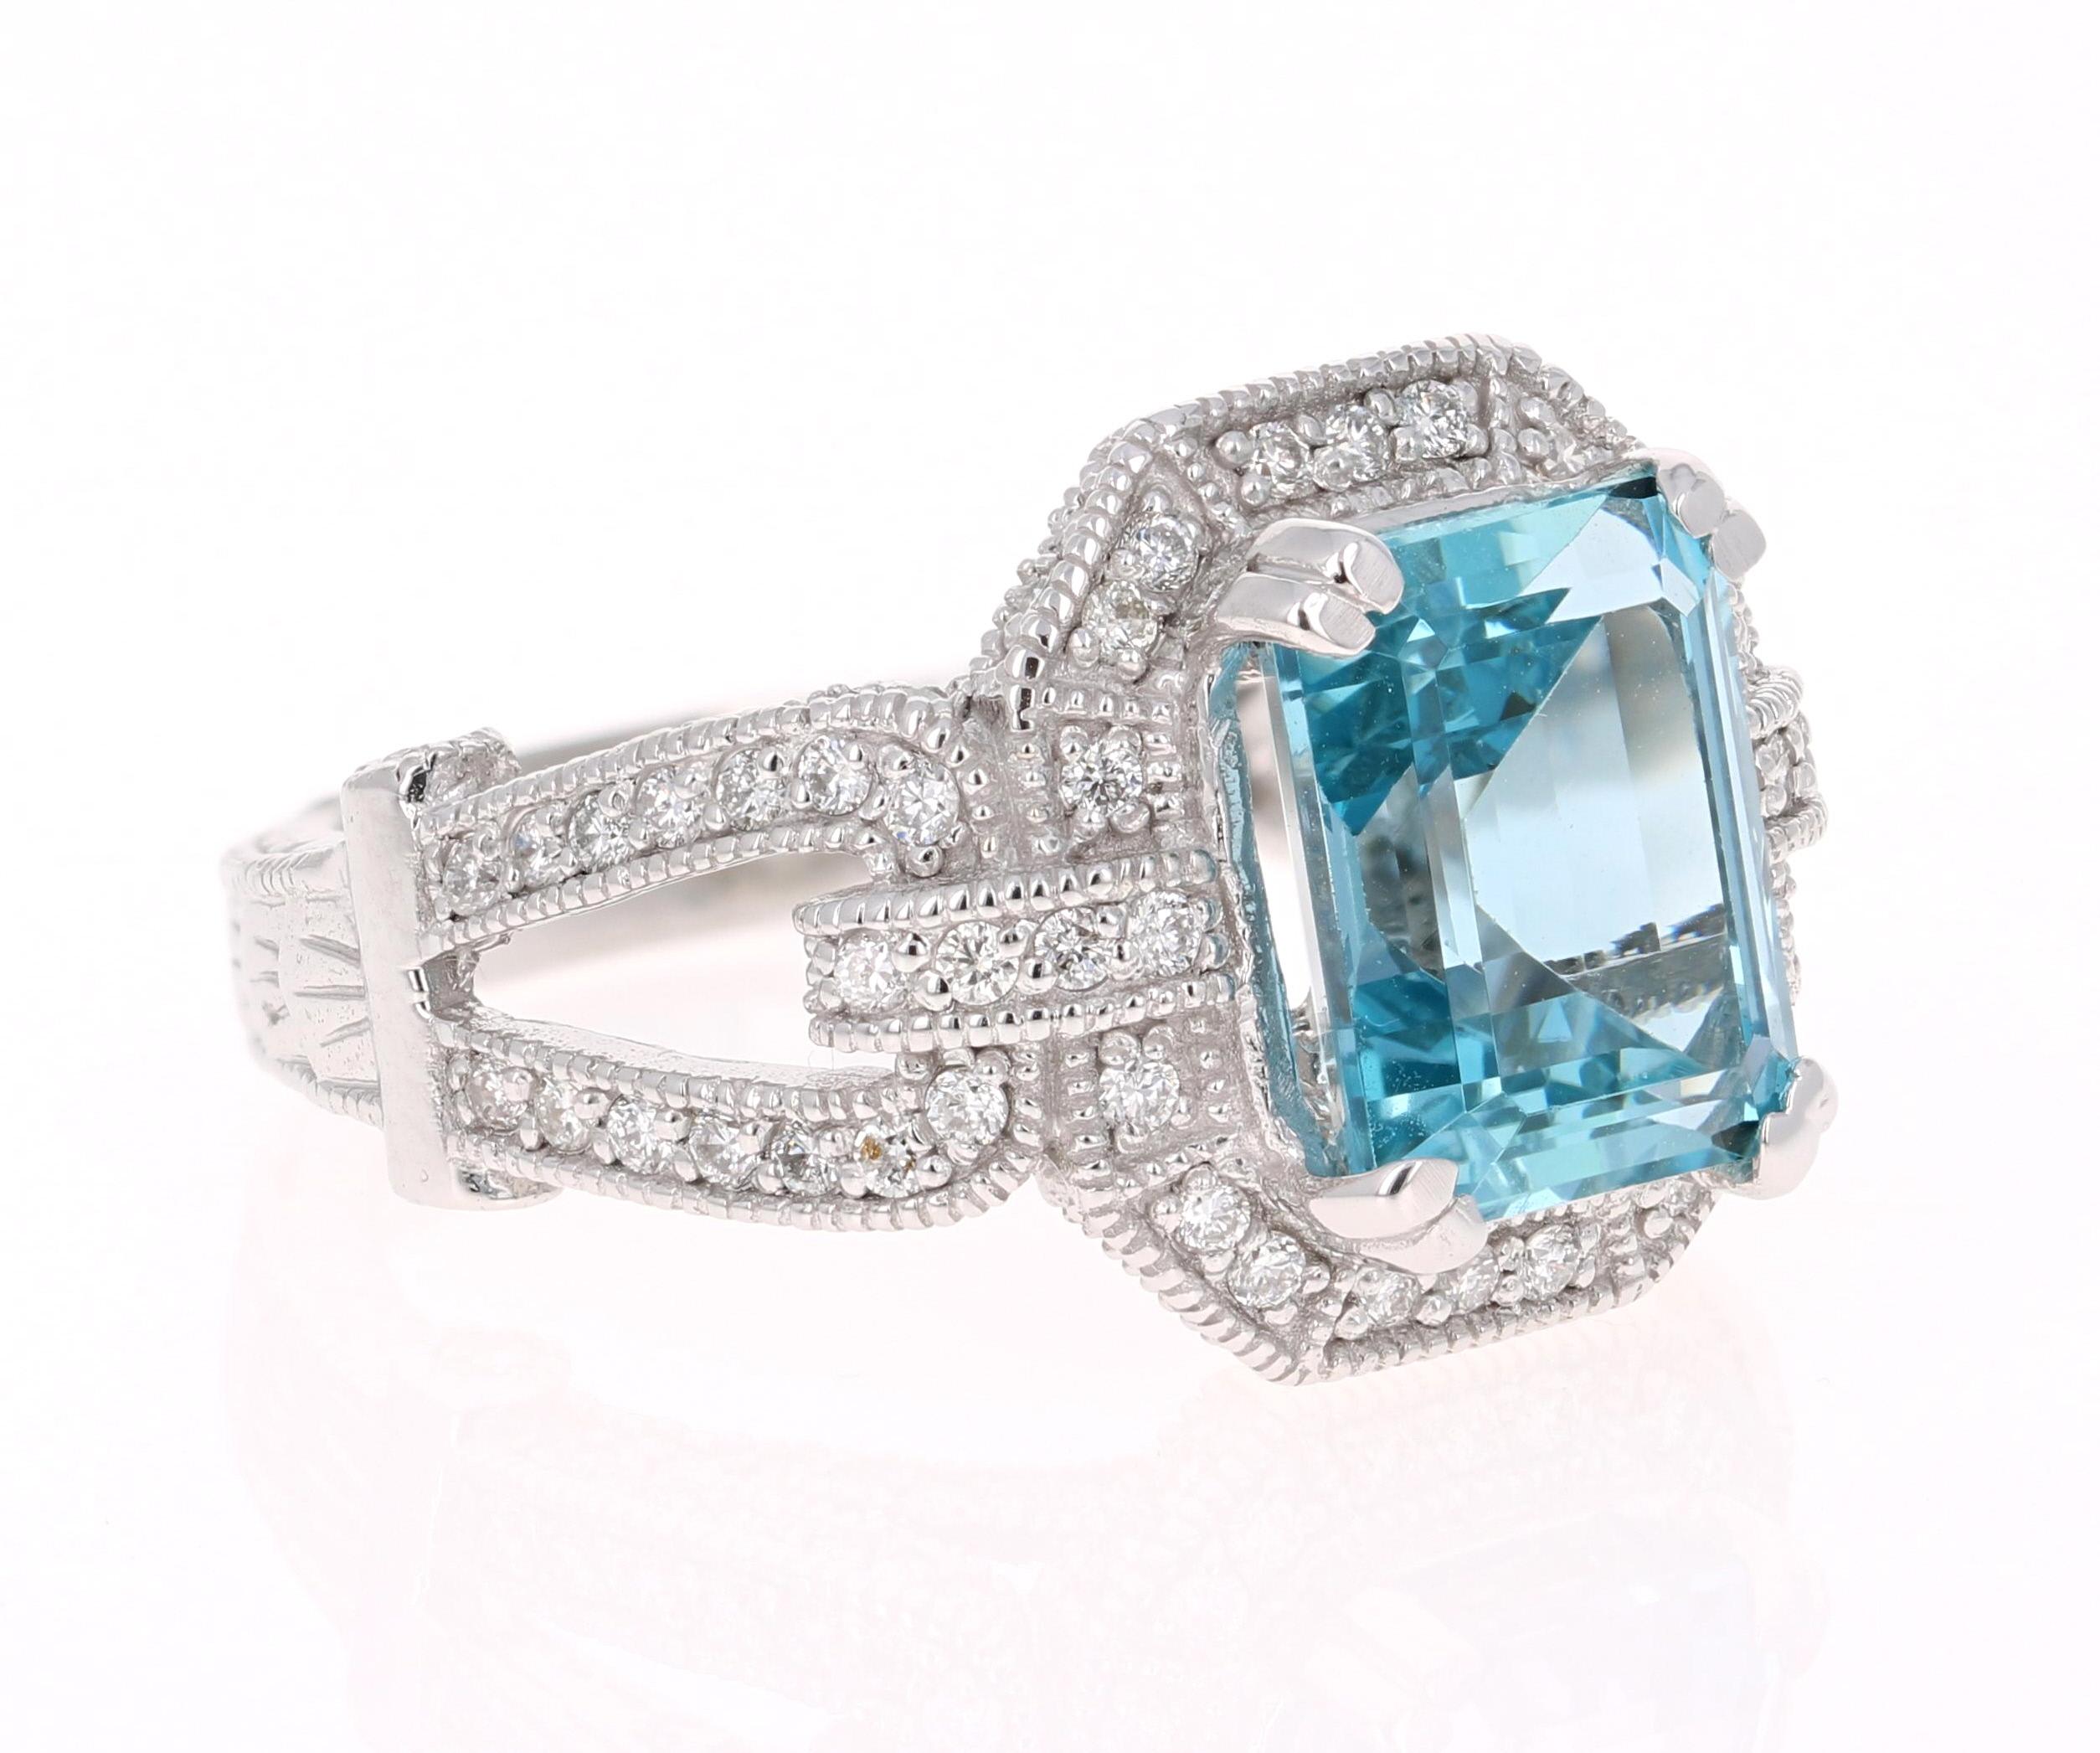 Stunning Art-Deco Inspired Masterpiece!!!! 
This ring has a beautiful 4.78 Carat Emerald Cut Aquamarine set in the center of the ring and is surrounded by 136 Round Cut Diamonds that weigh 1.27 carat (Clarity: VS2, Color: F). The total carat weight